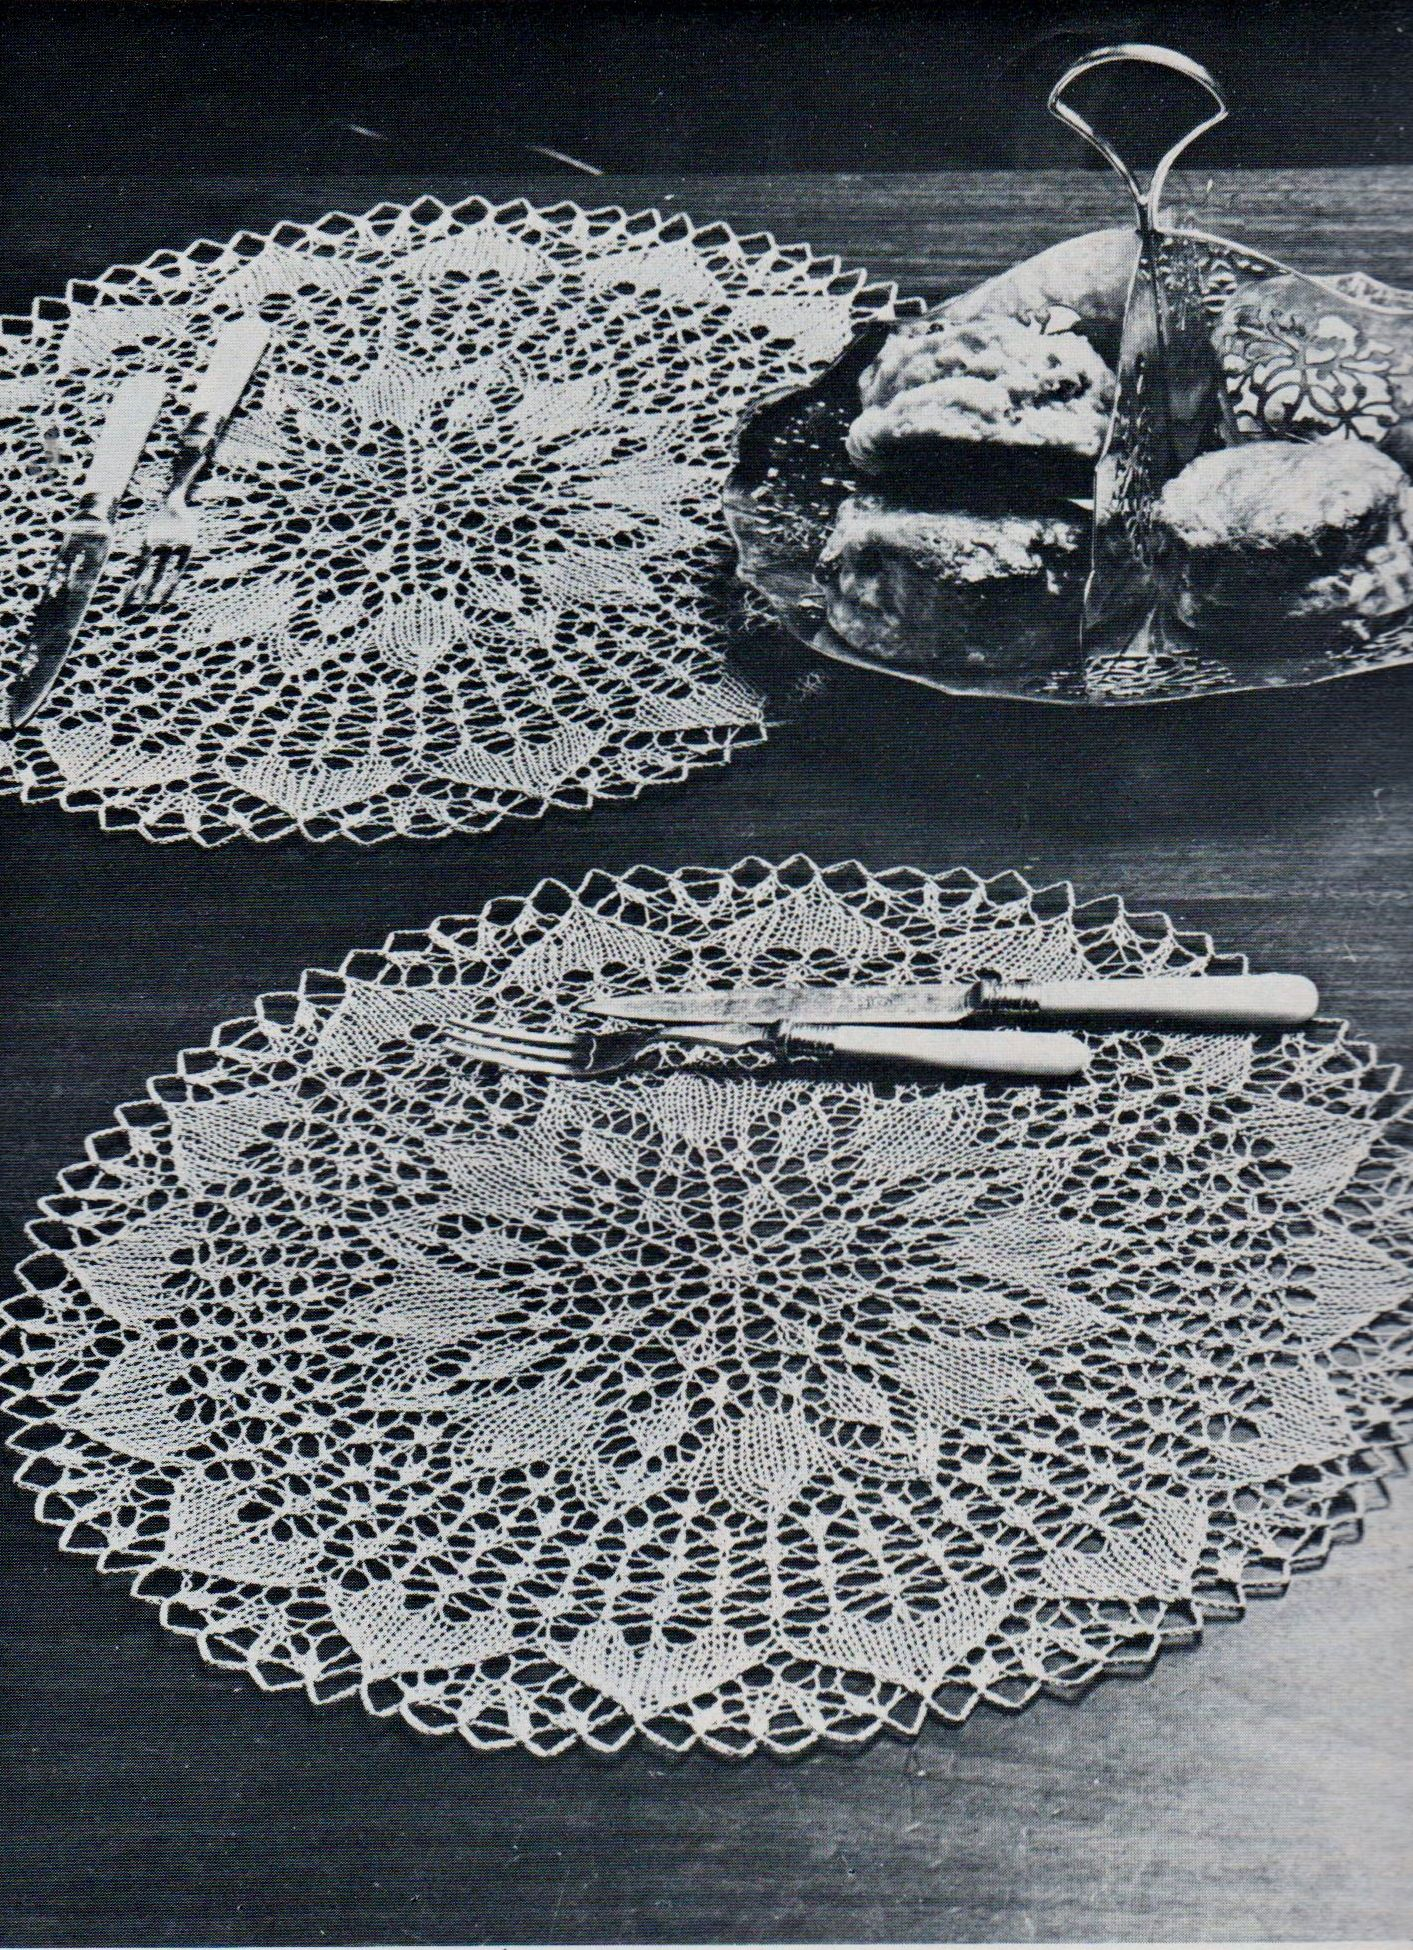 Knitted Lace Pattern Pdf Digital Download Vintage Knitting Pattern To Make Knitted Lace Lunch Mats Table Mats Or Doilies 13 Diameter